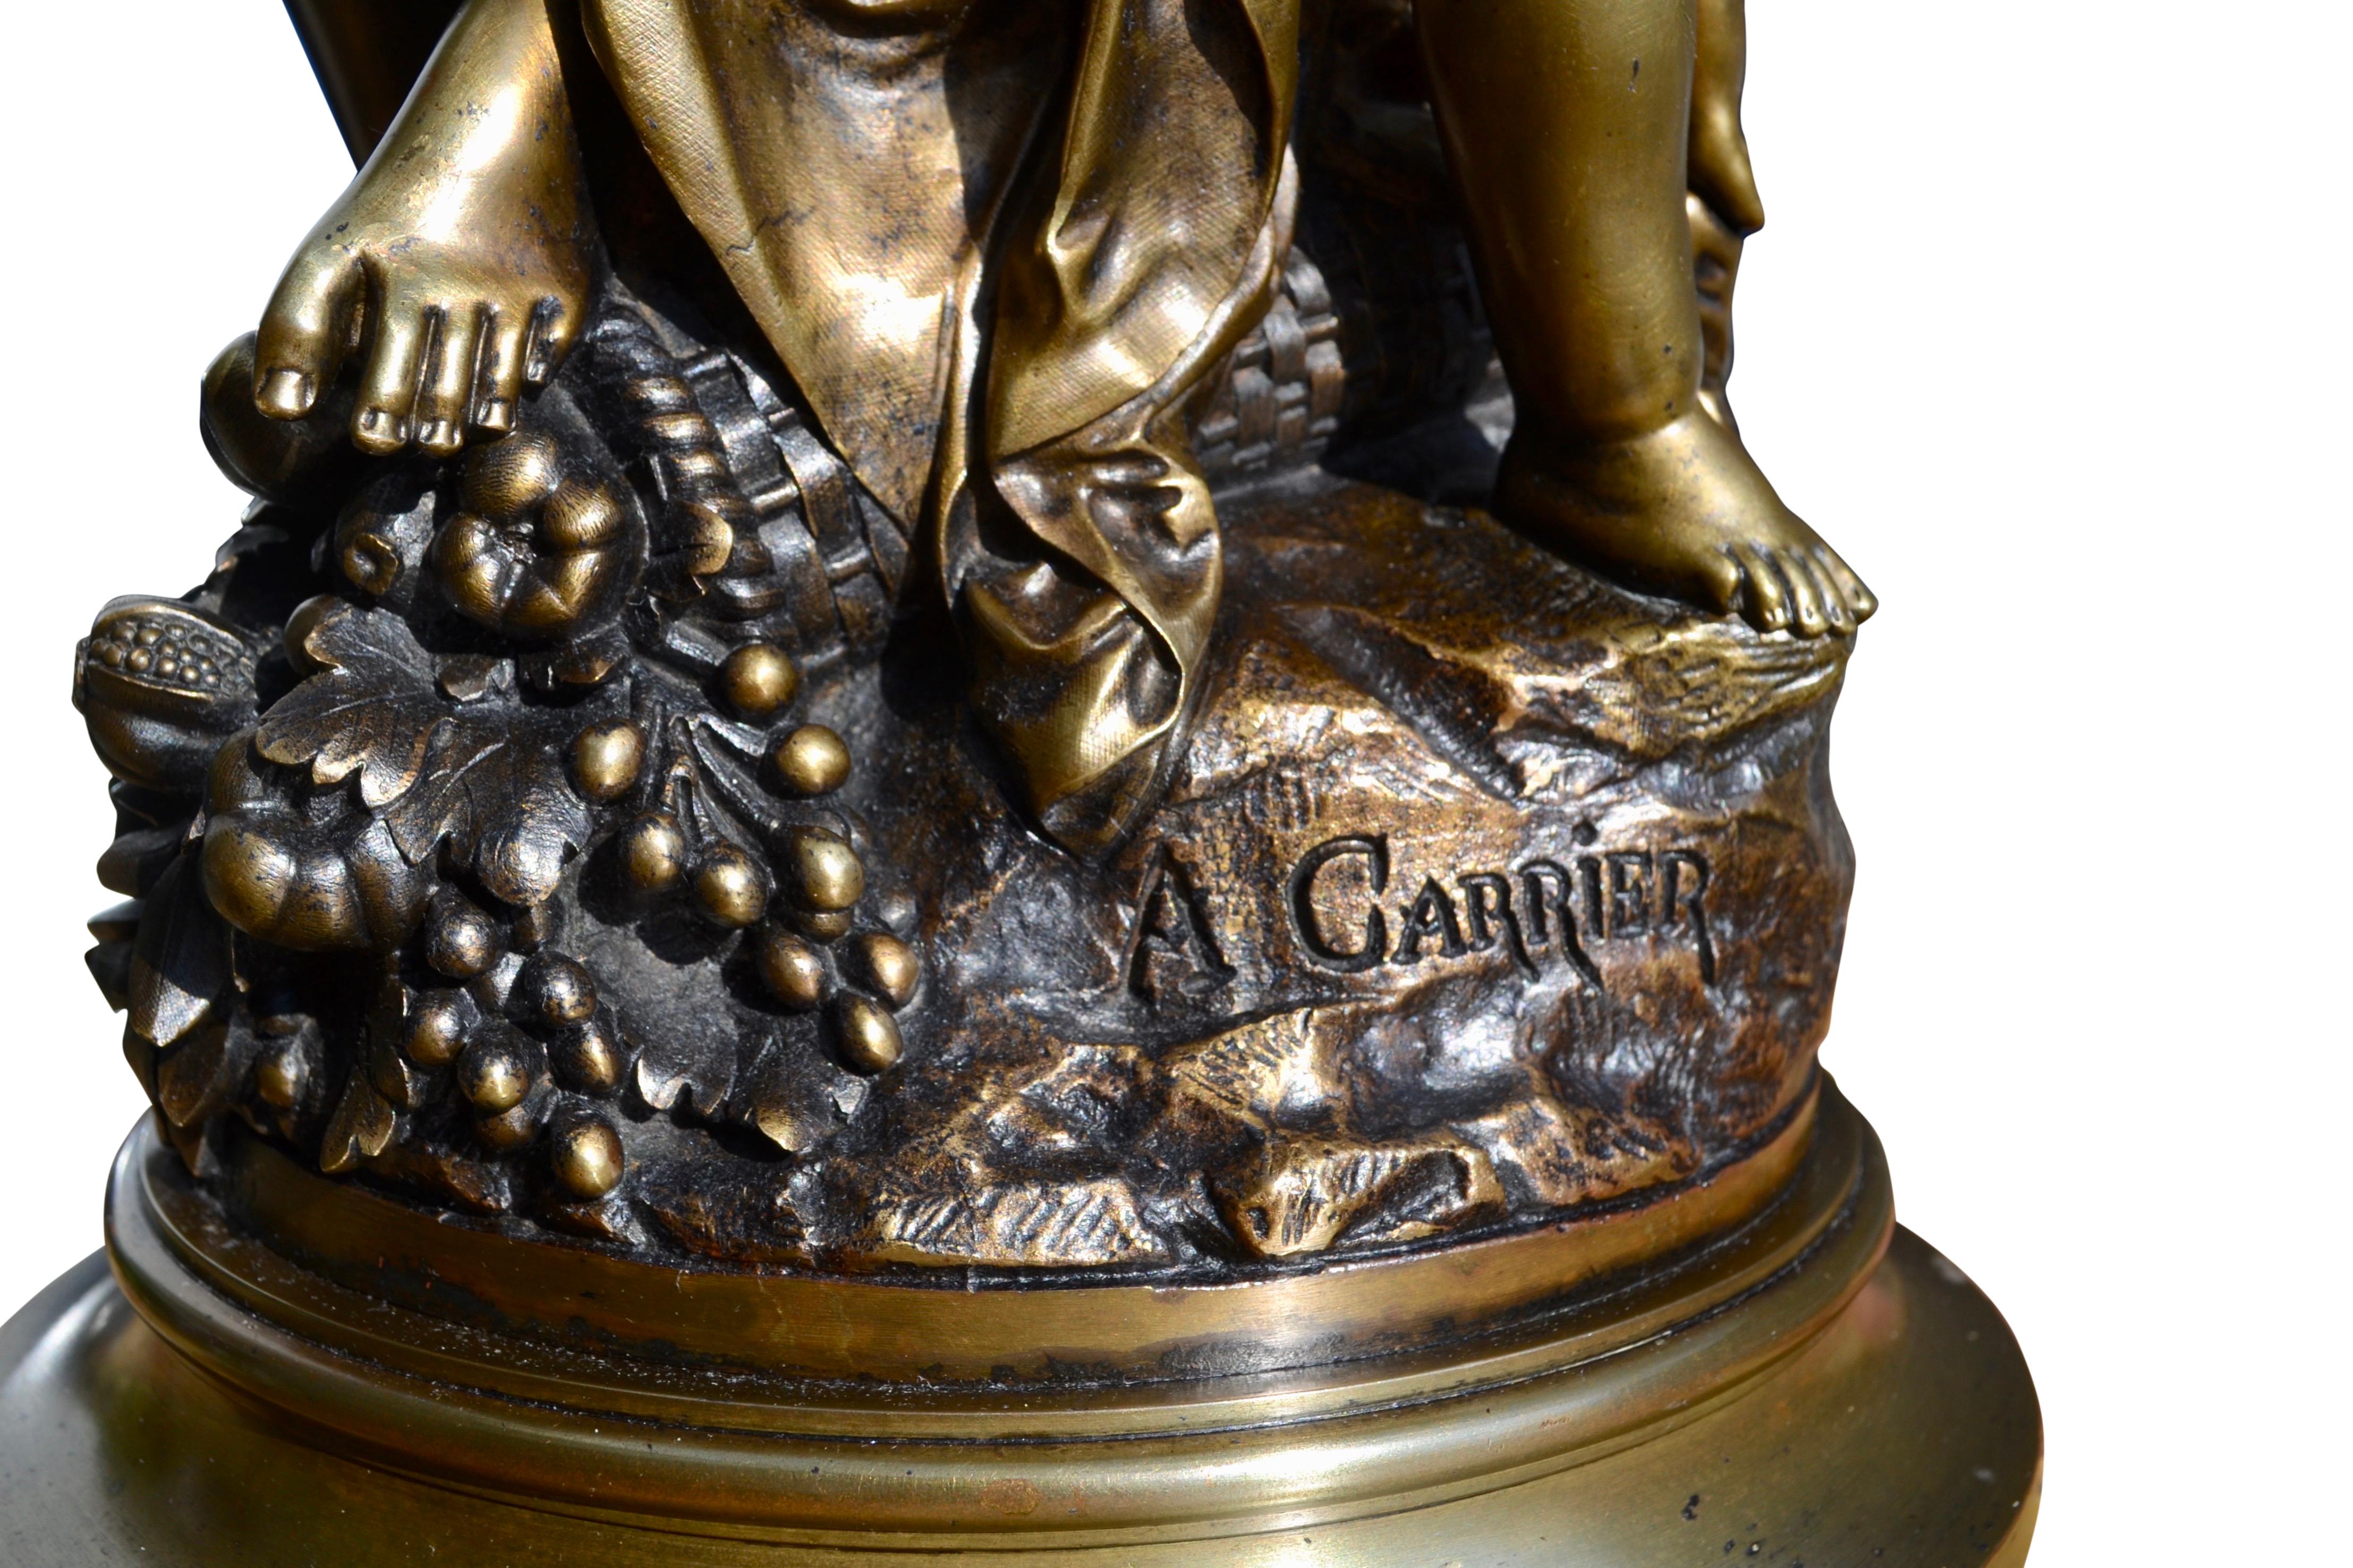  A 19 Century French  Gilt bronze Statue of Venus and Cupid  signed A. Carrier  2